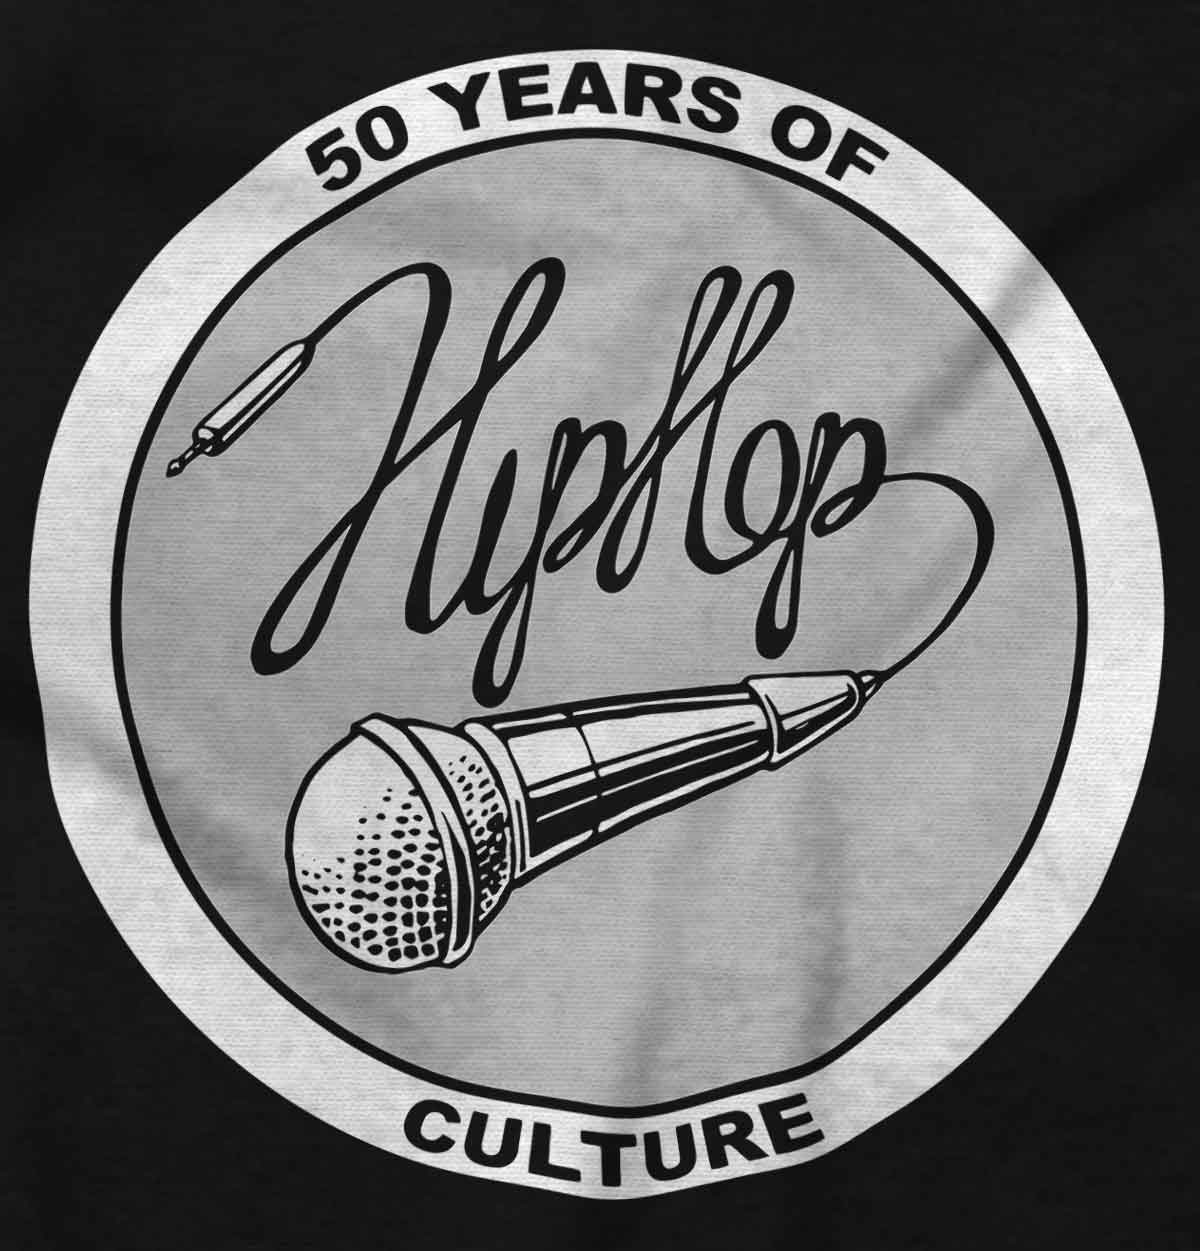 This design honors hip-hop culture and its 50-year legacy with a mic and wire writing hip hop with it, embodying its creativity and strength, allowing you to express hip-hop as a way of life.